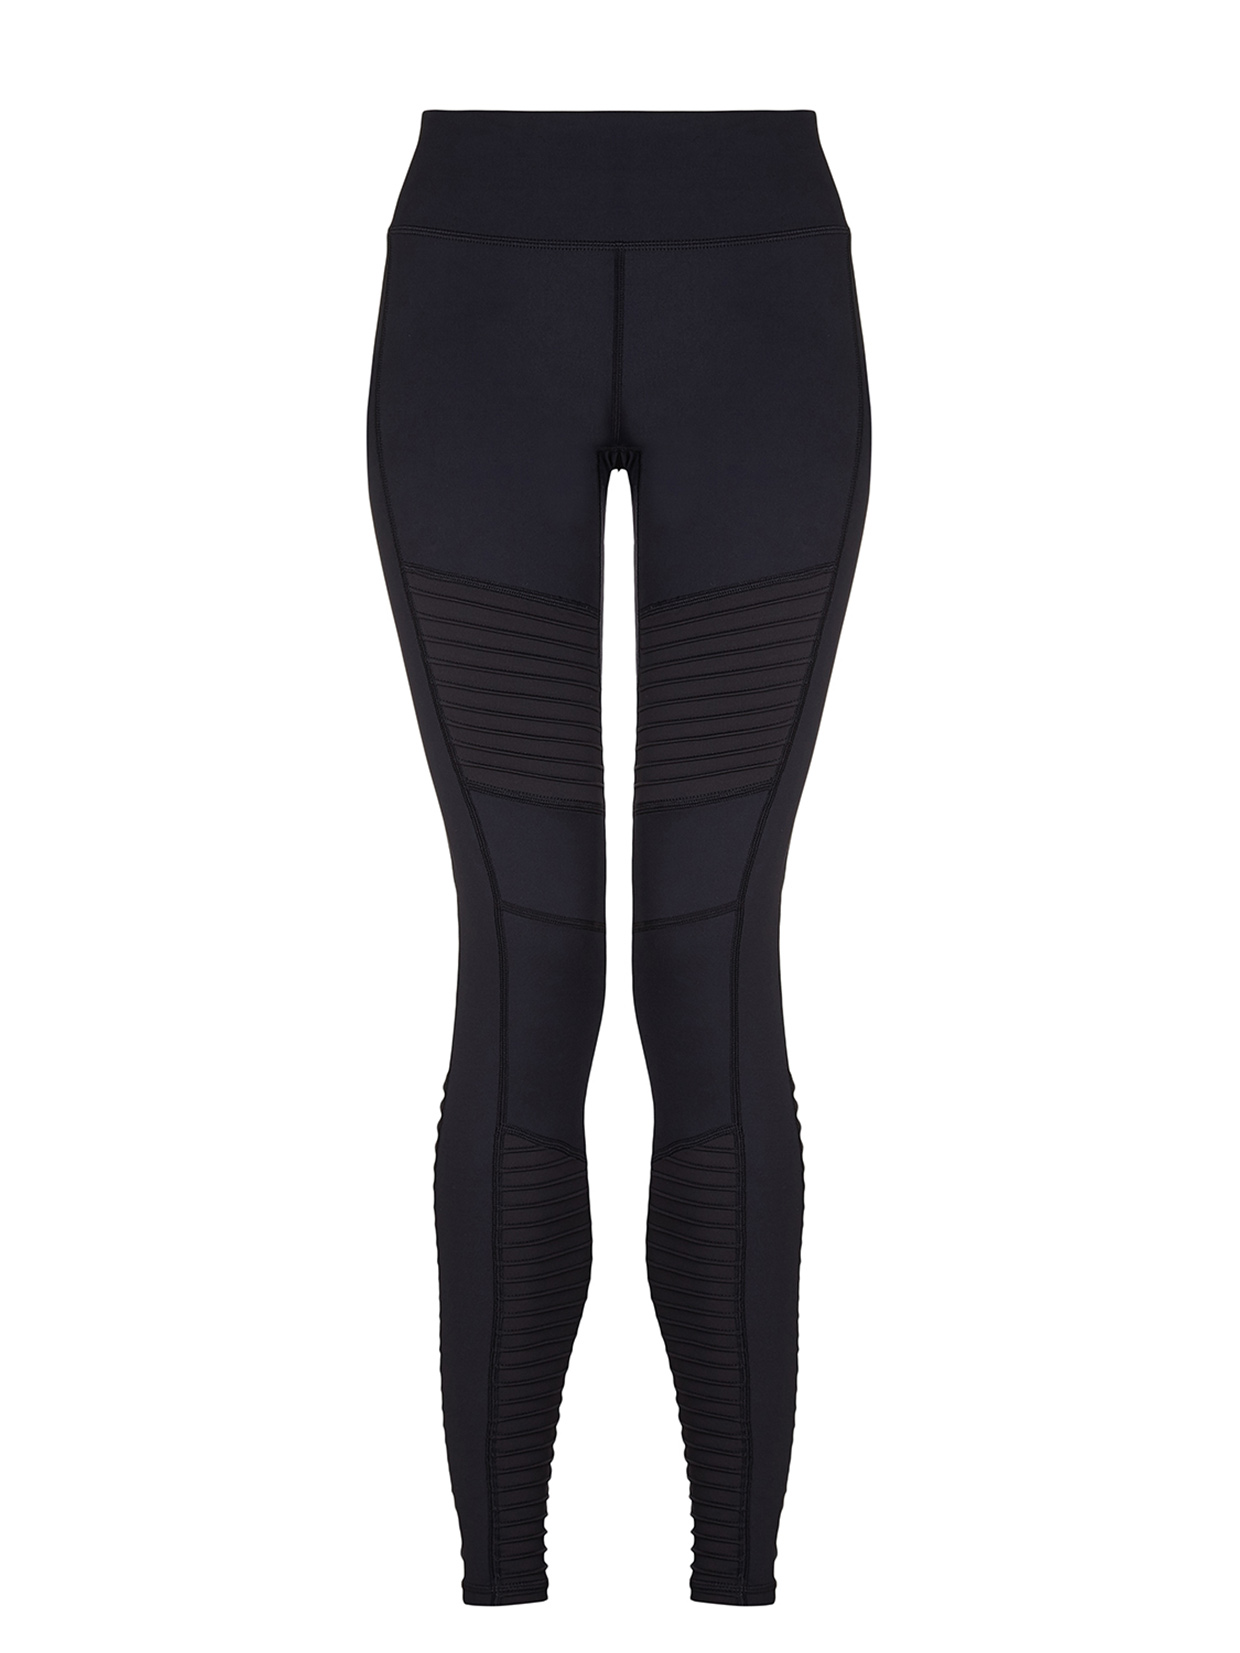 Luxe Black High Waisted Gym Leggings with Second Skin Fit – Born Nouli